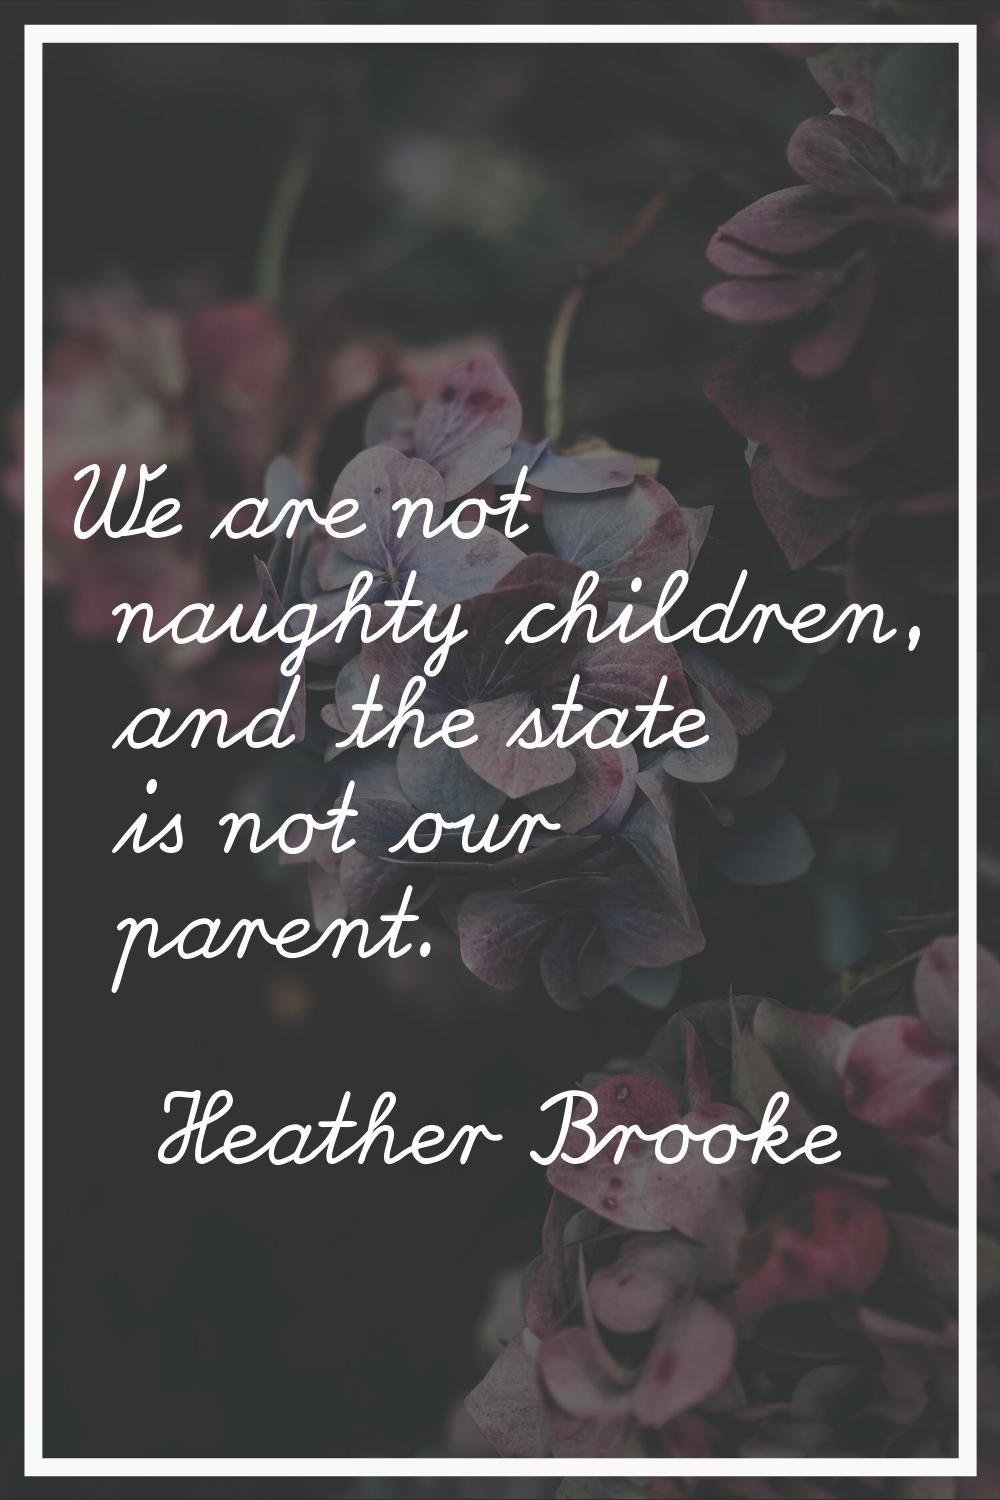 We are not naughty children, and the state is not our parent.